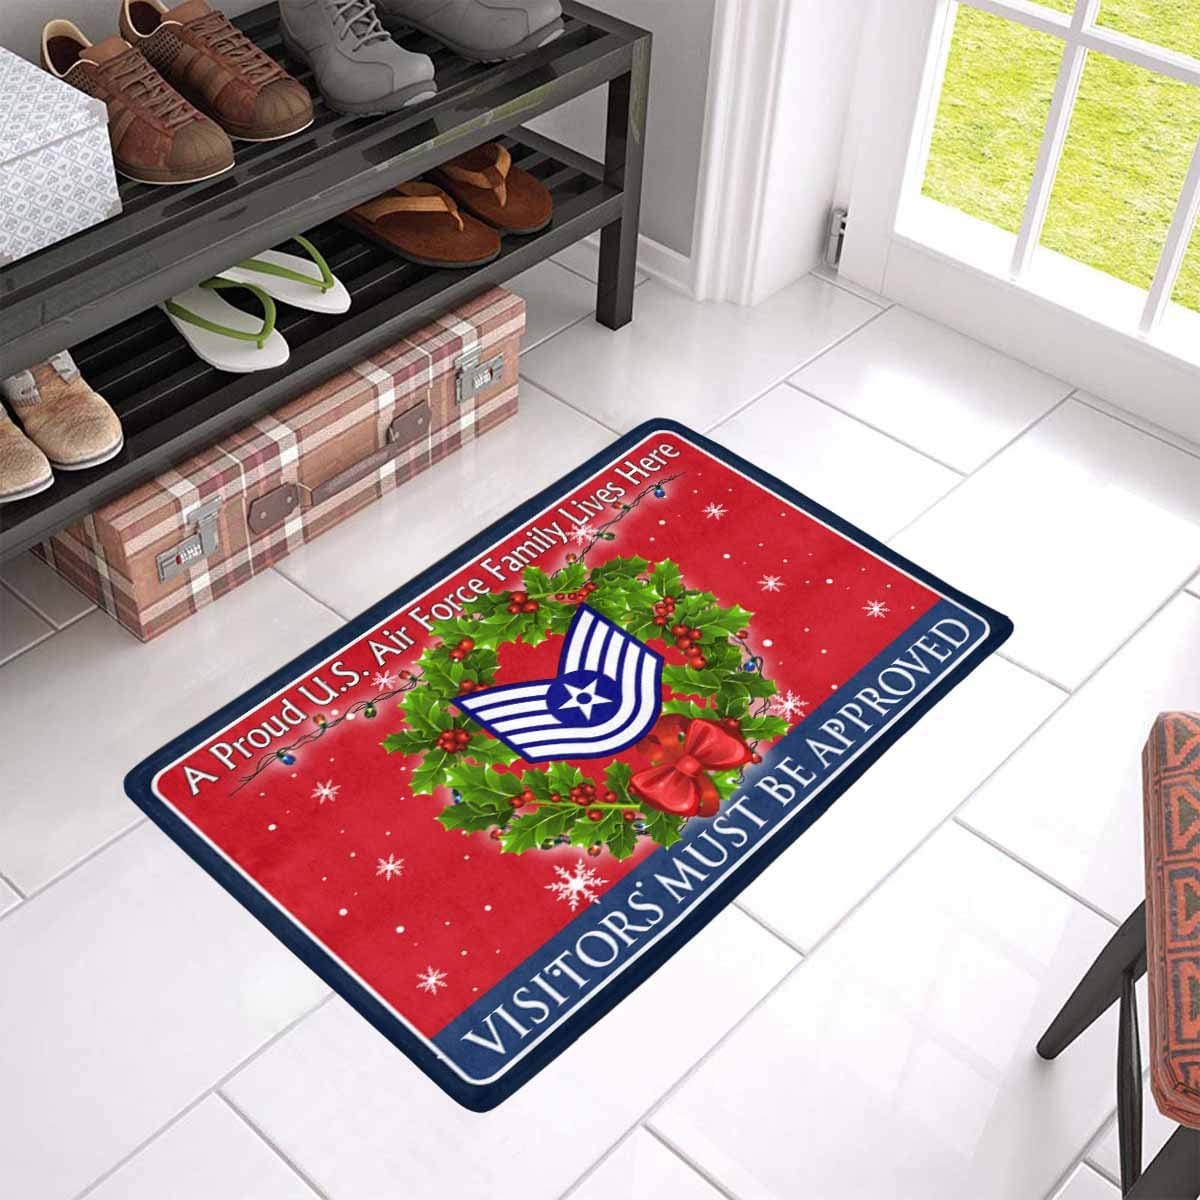 US Air Force E-6 Technical Sergeant TSgt E6 Noncommissioned Officer Ranks AF Rank - Visitors must be approved - Christmas Doormat-Doormat-USAF-Ranks-Veterans Nation